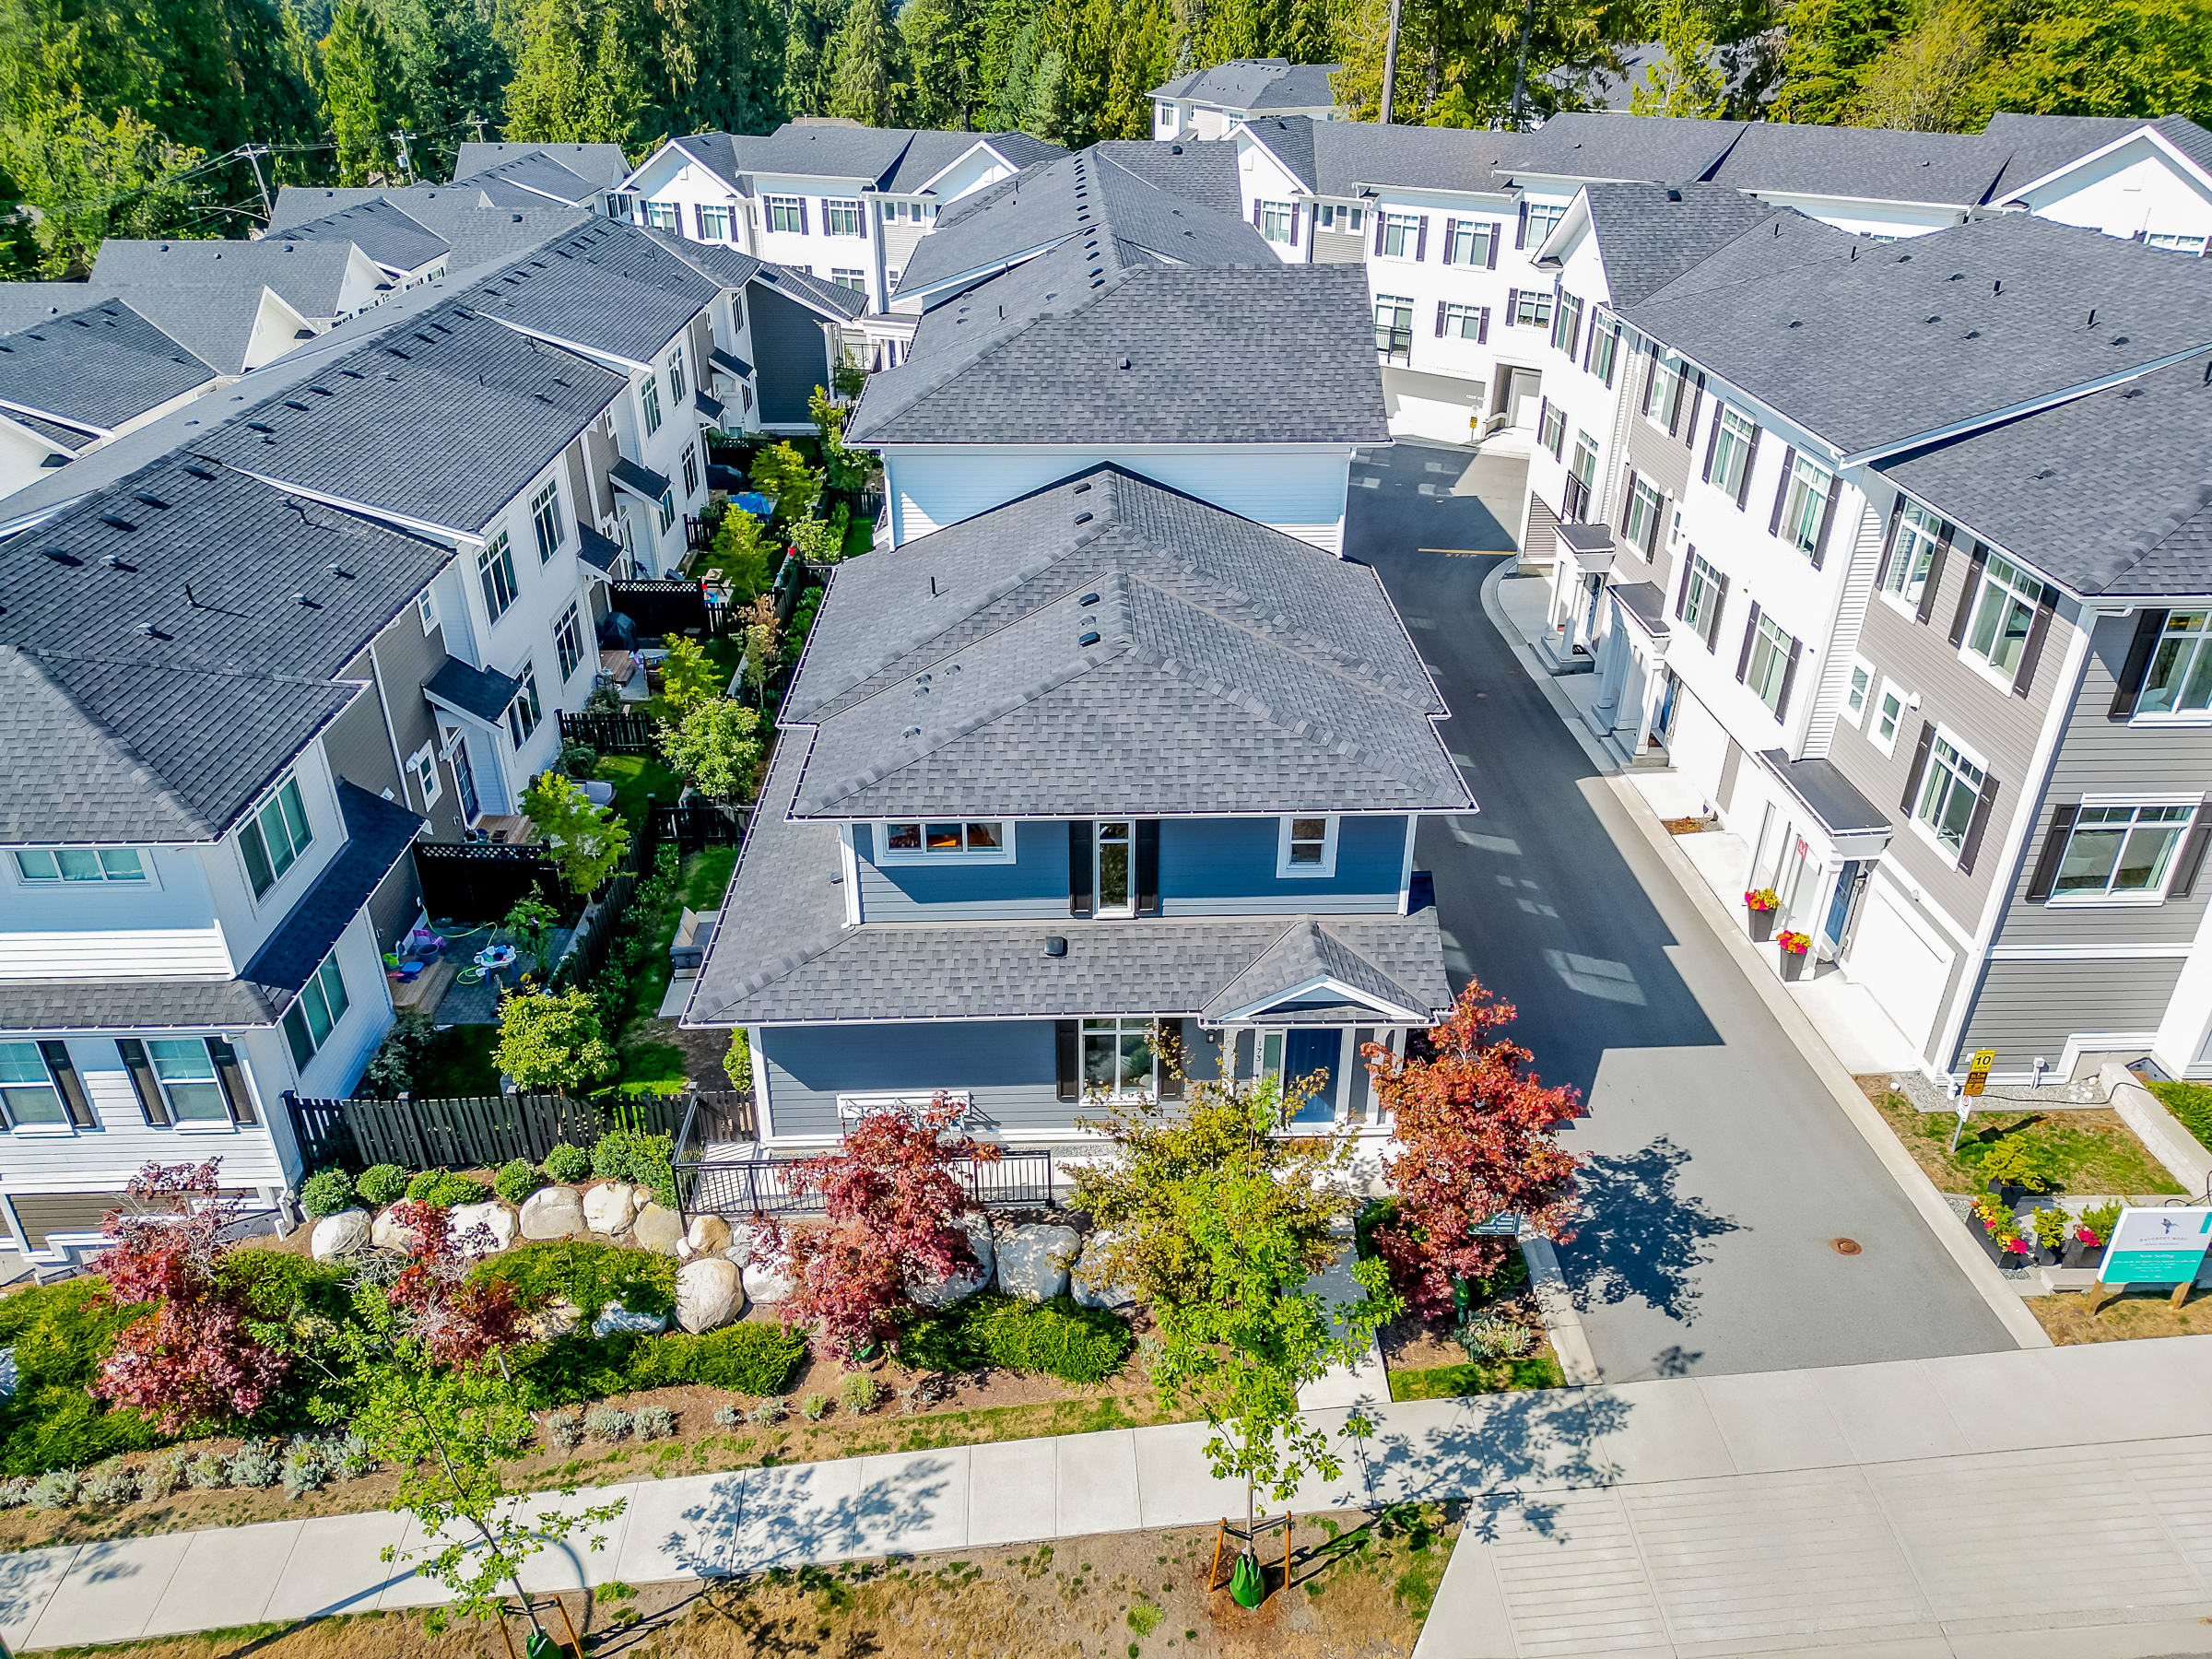 Burke Mountain Townhome For Sale Krista Lapp Unit 173 1220 Rocklin Street Coquitlam Real Estate Listings